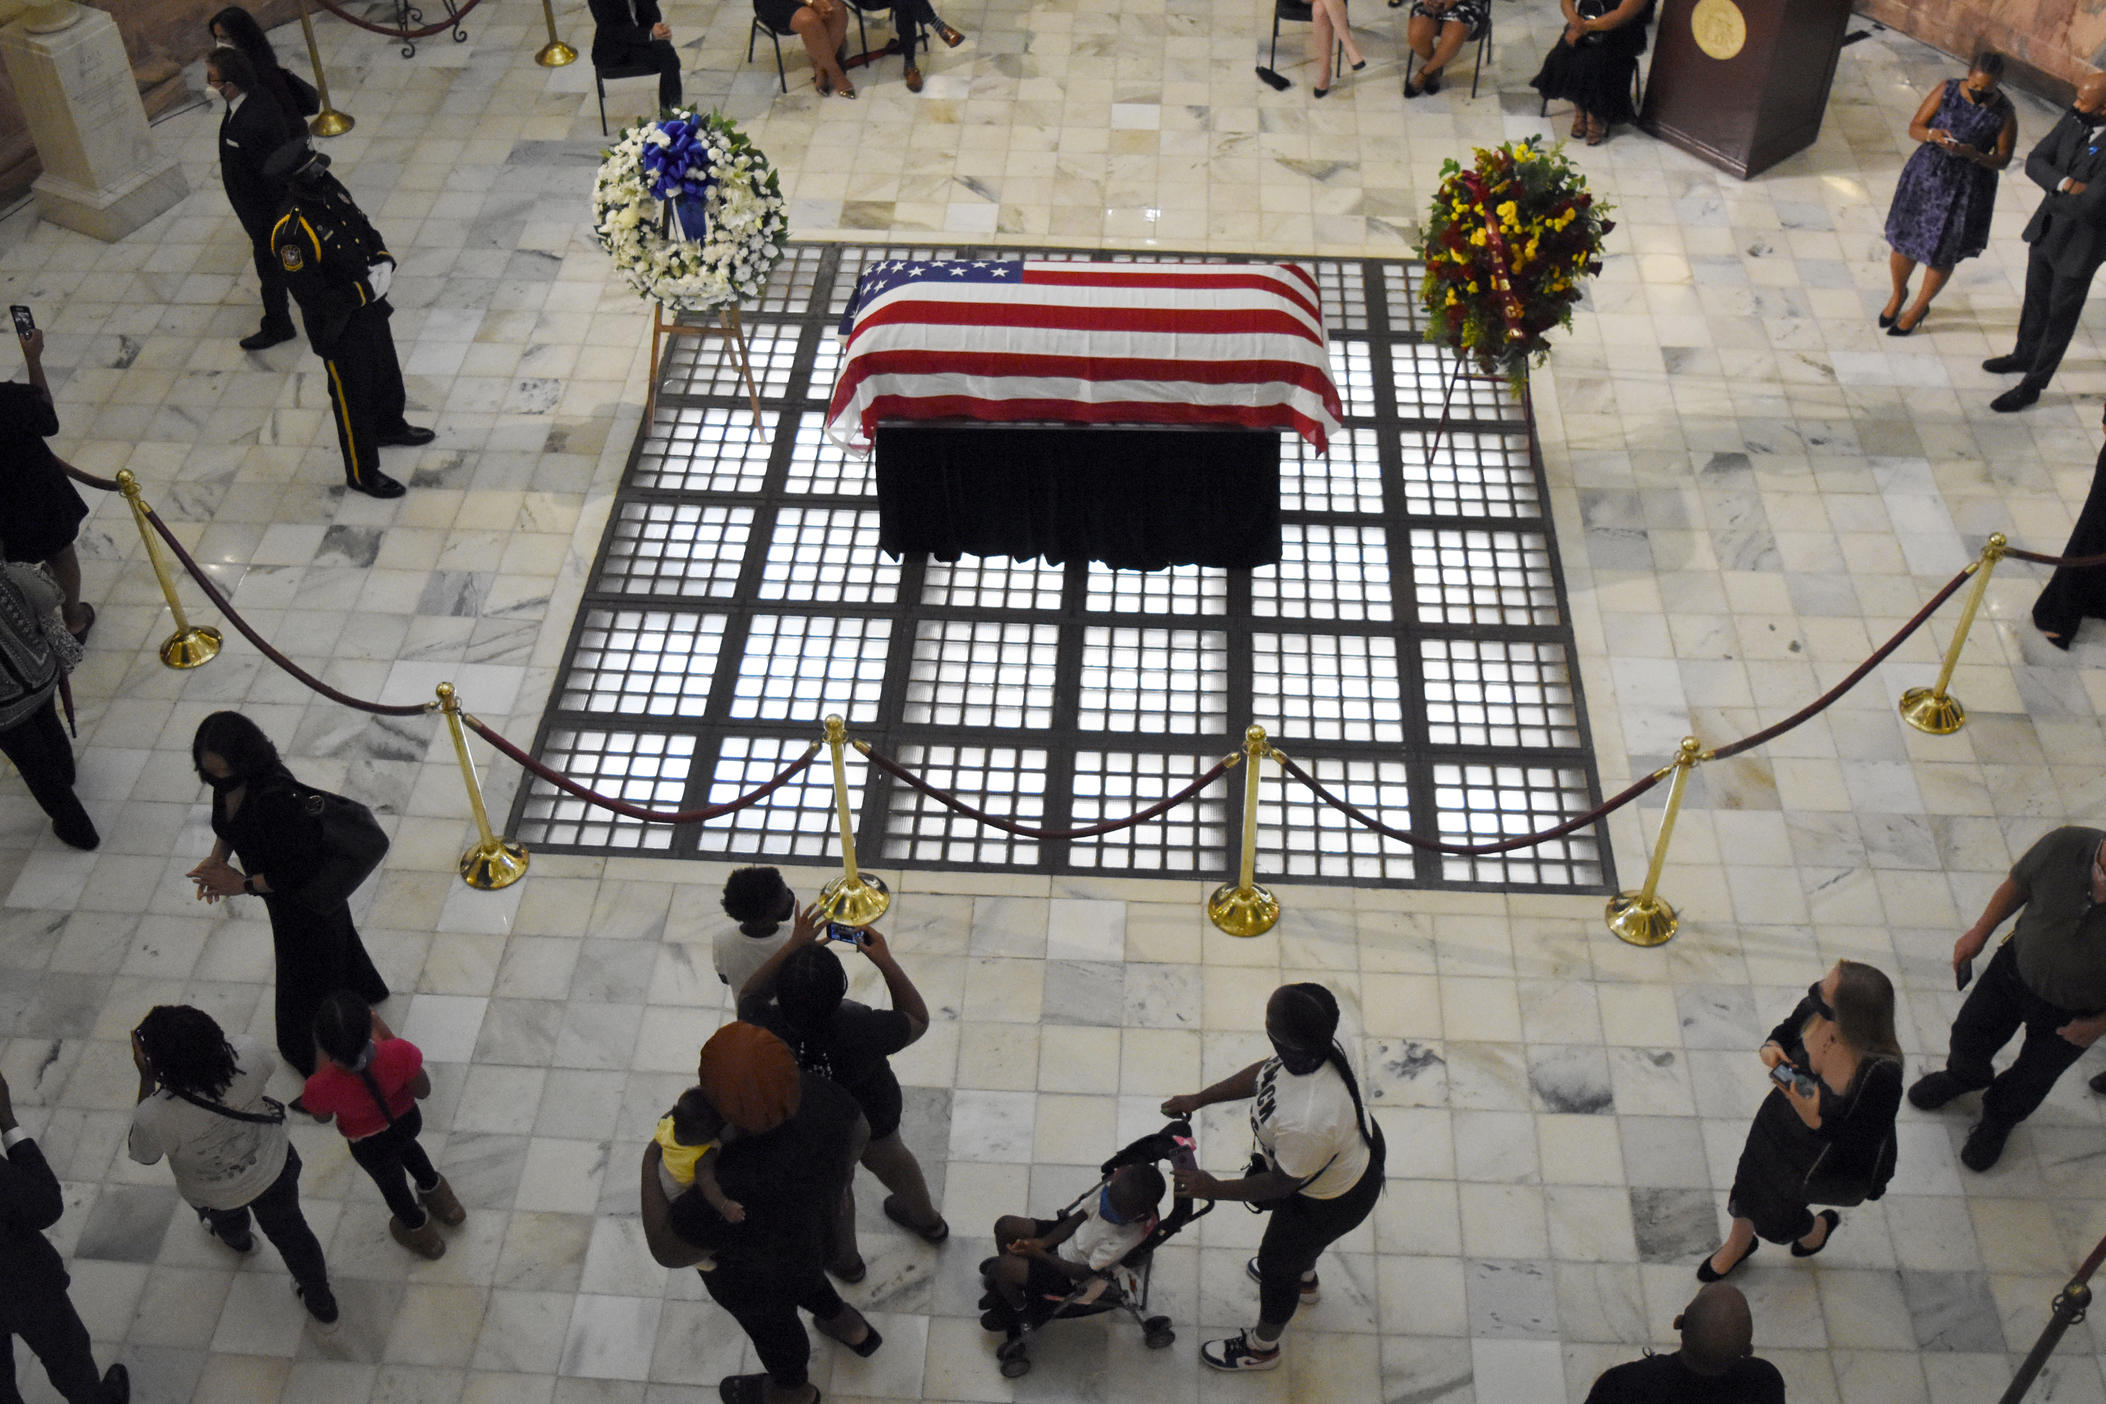 Mourners pass through the Georgia State Capitol to pay respects to Rep. John Lewis.